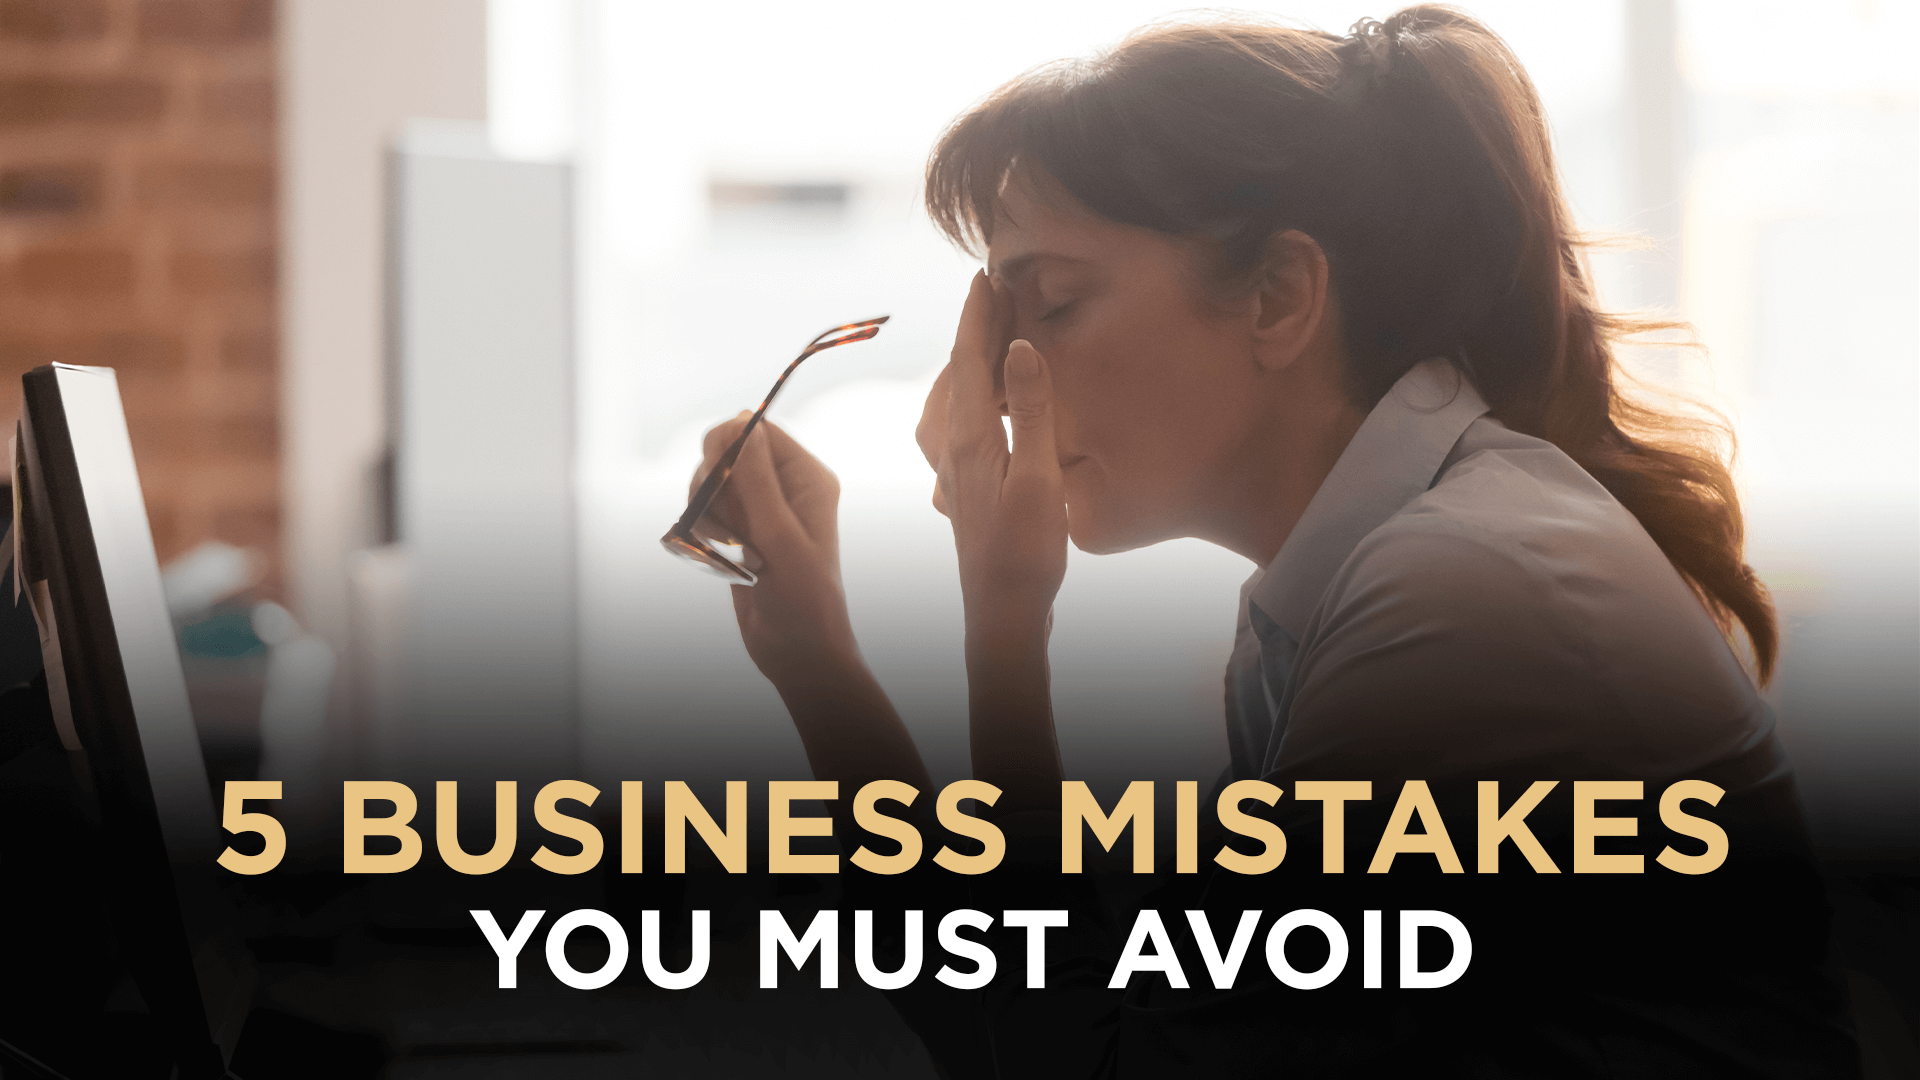 5 Business Mistakes You Must Avoid